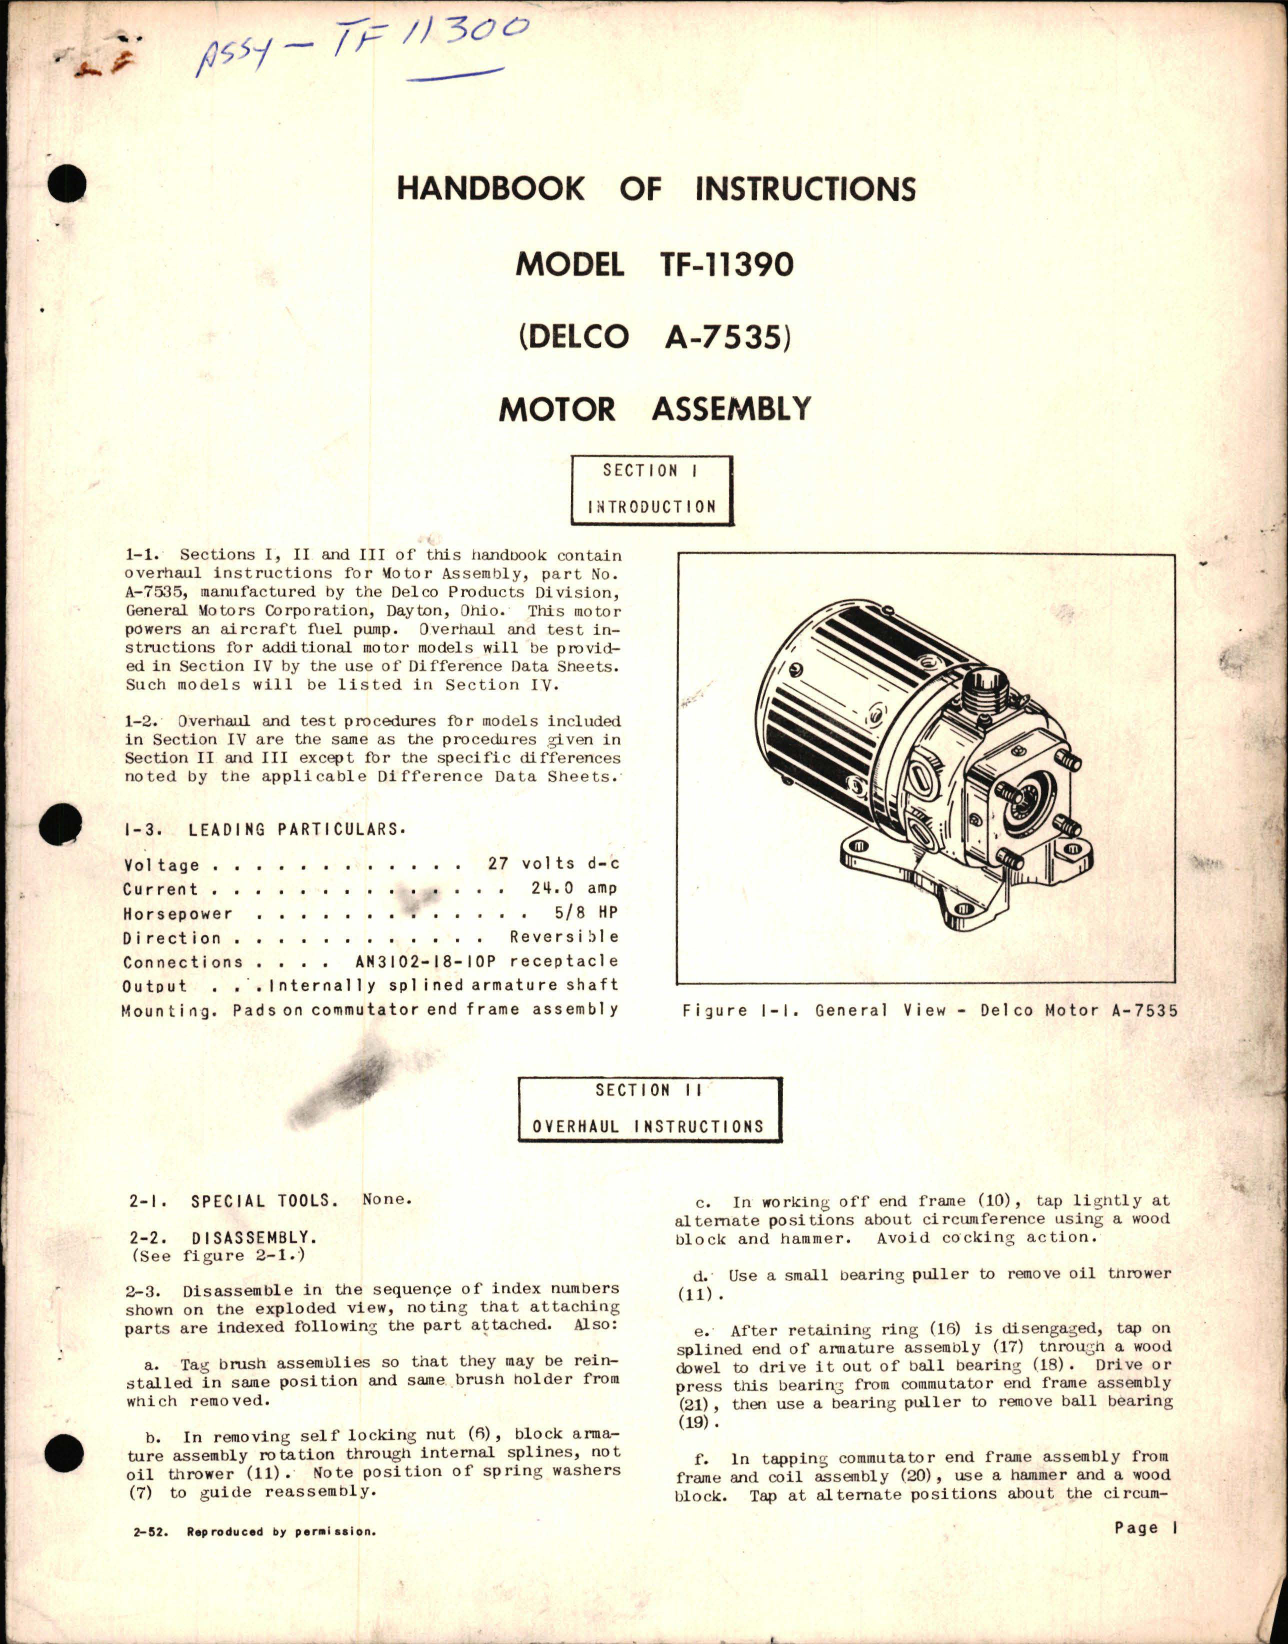 Sample page 1 from AirCorps Library document: Handbook of Instructions for Motor Assembly A-7535 - Model TF-11390 